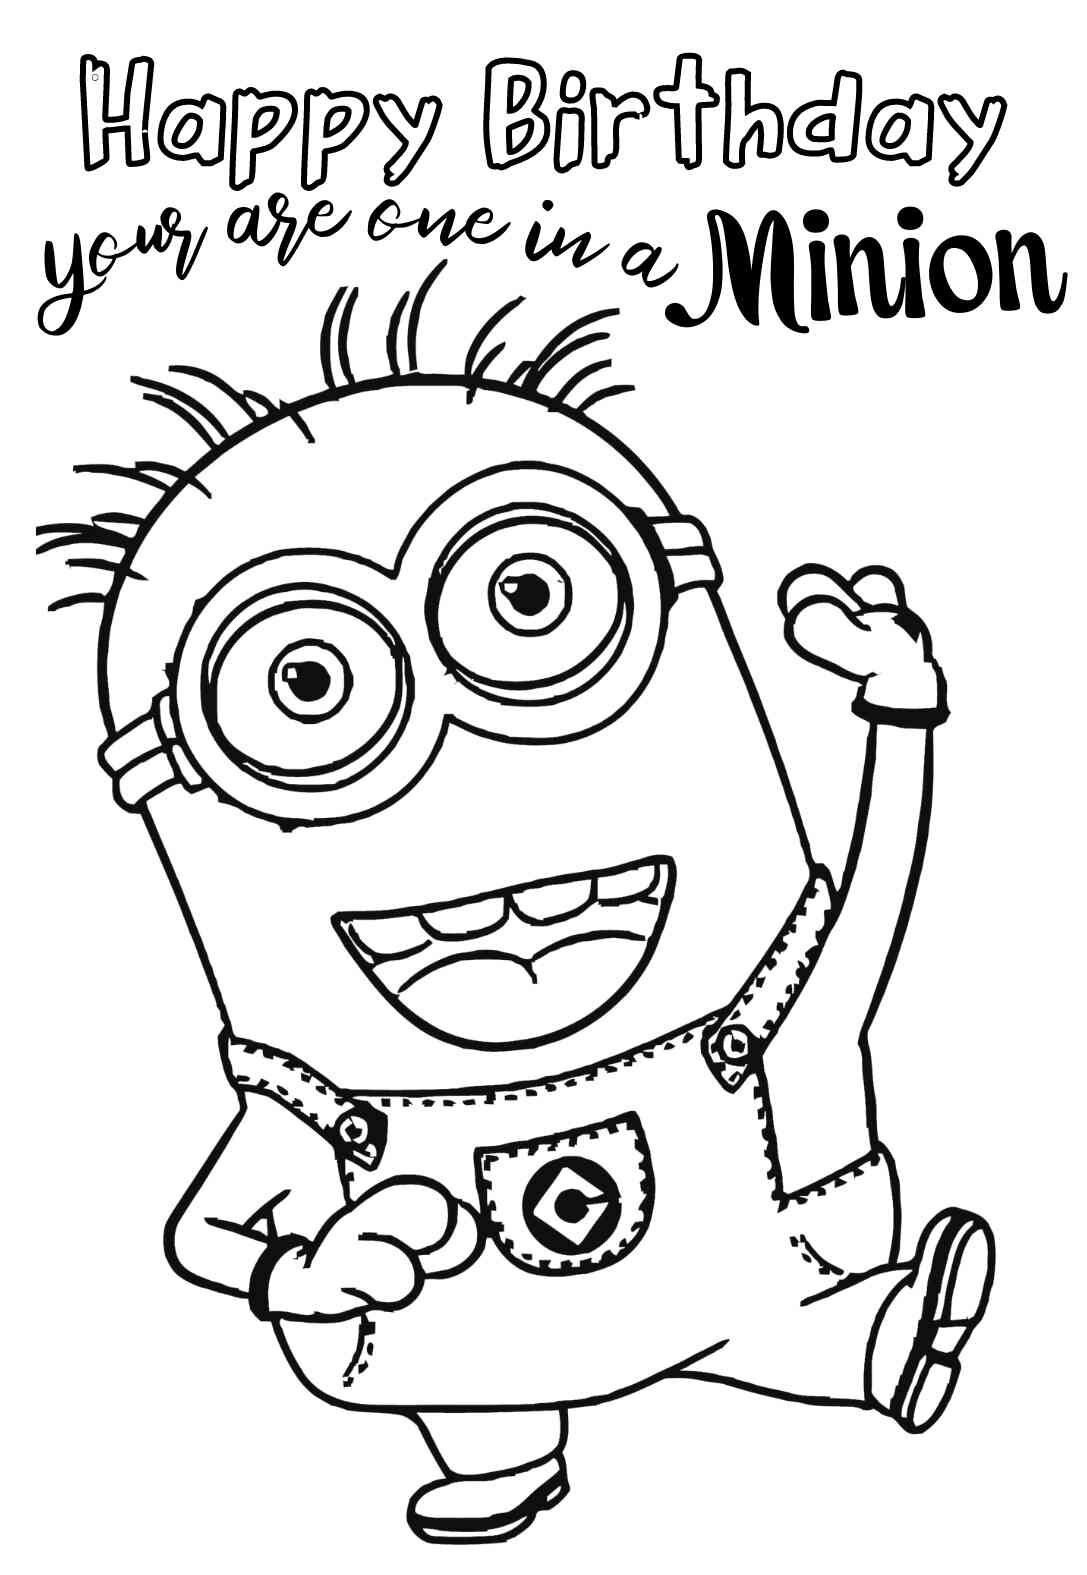 free minions birthday coloring pages cards printbirthday cards